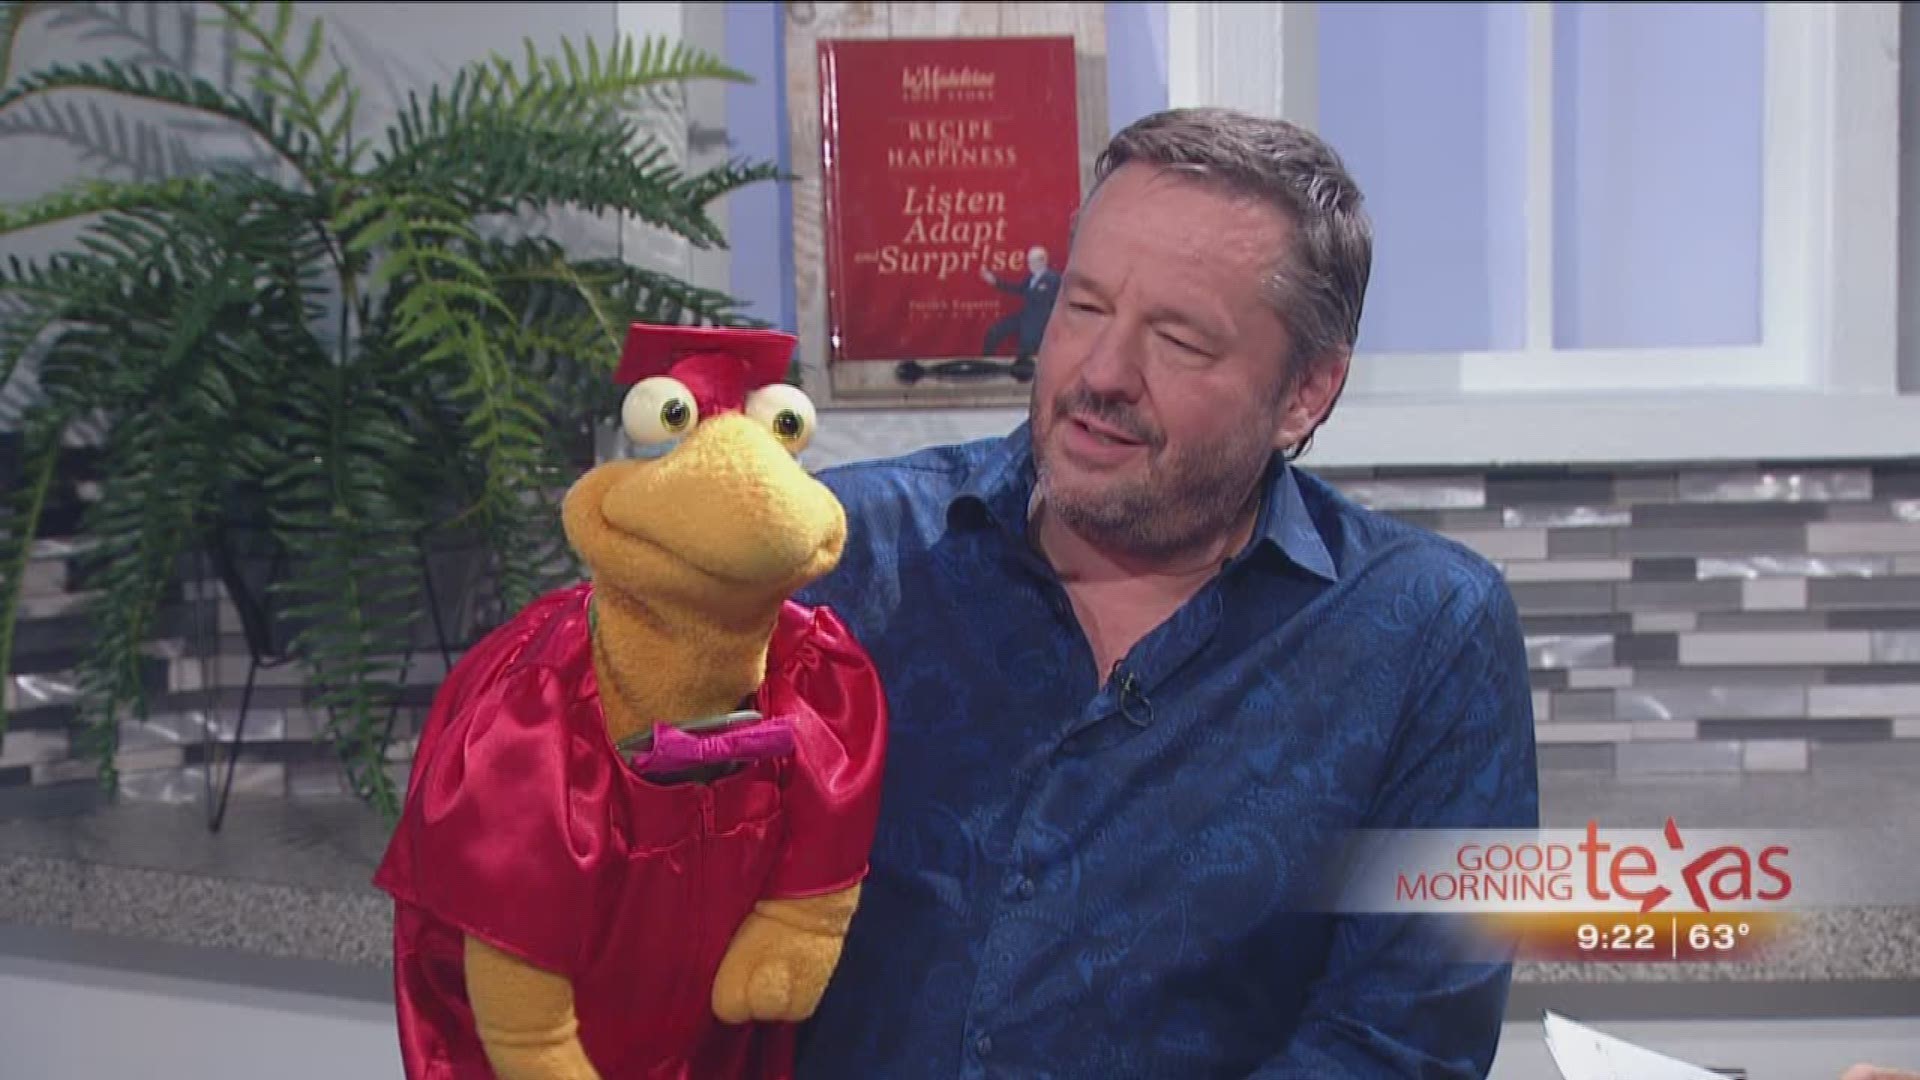 America's Got Talent Winner and North Texan Terry Fator and "Winston". Headlines at the Mirage in Las Vegas. For more information go to terryfator.com